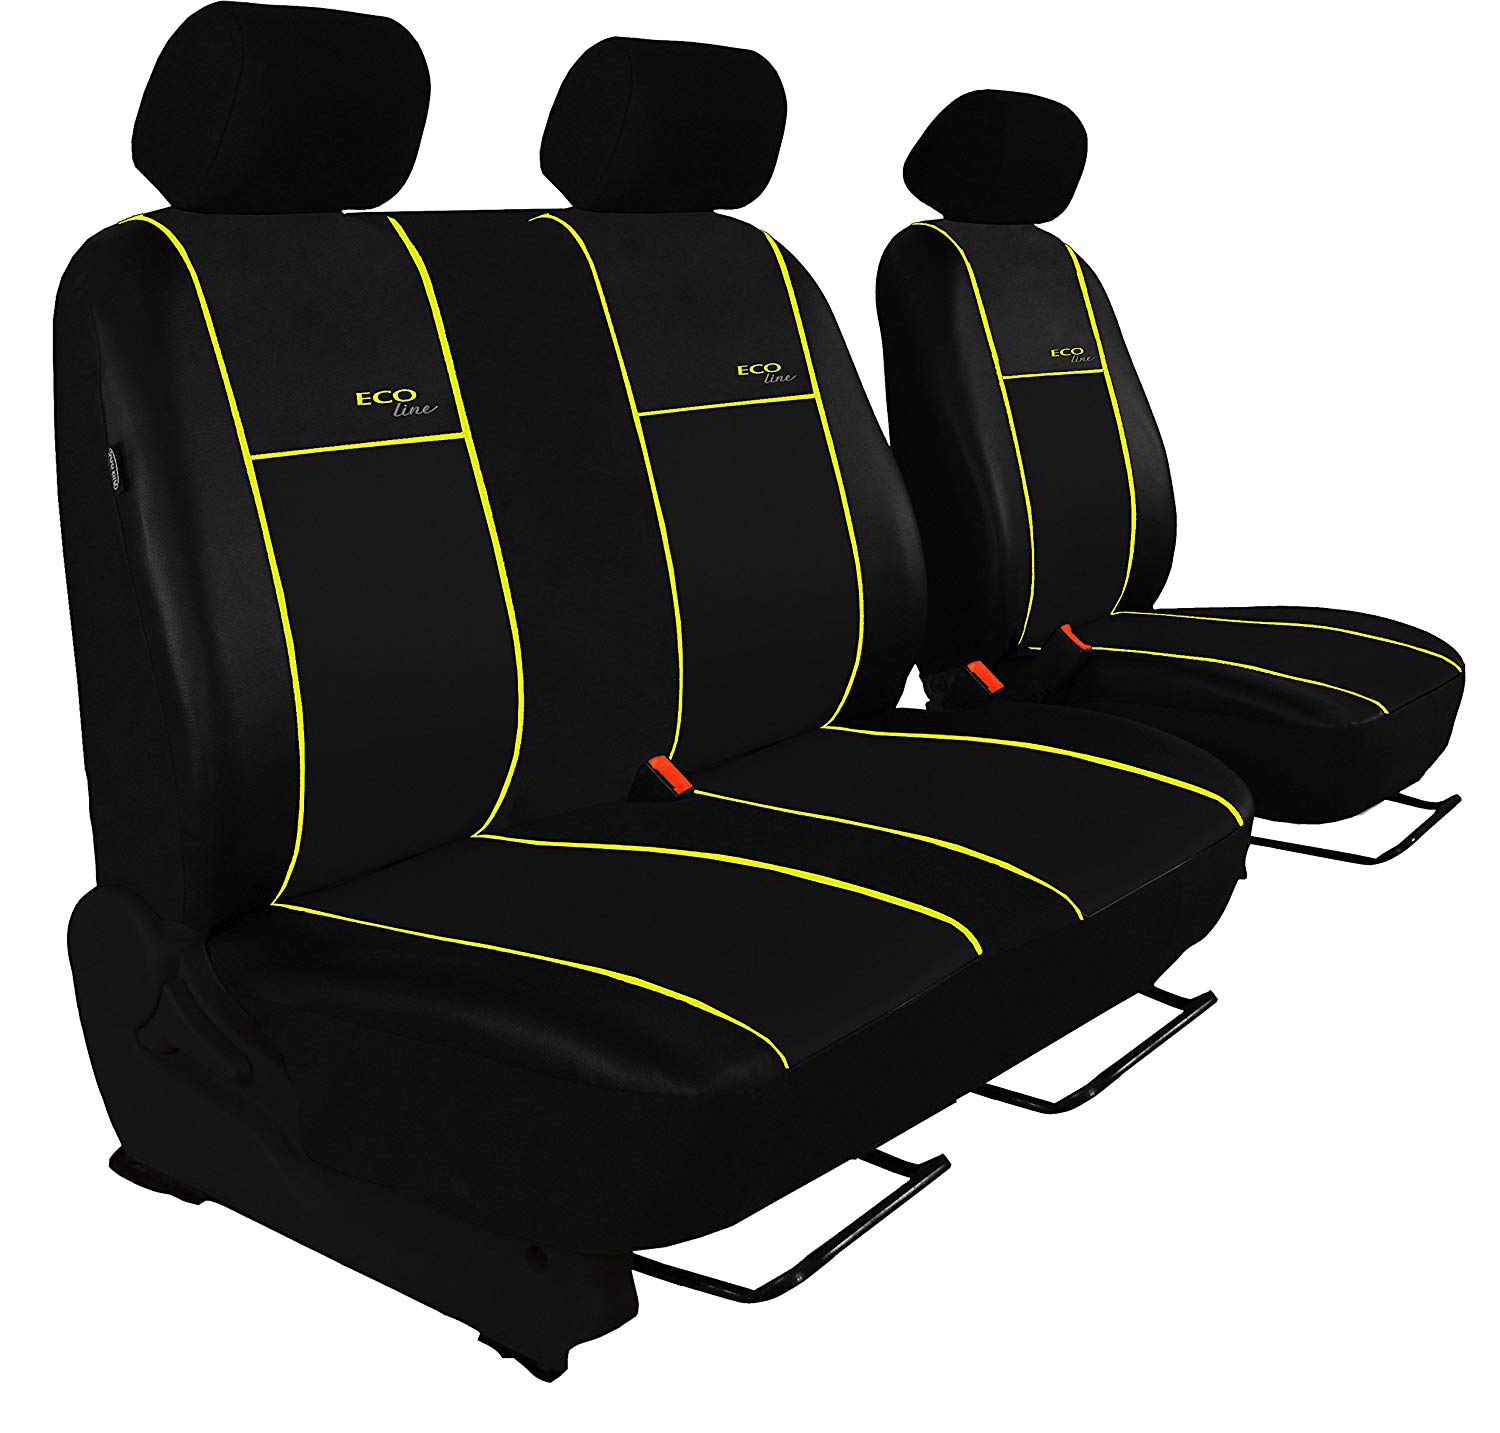 Custom Fit Seat Cover for T5 Transporter Driver\'s Seat + 2 Passenger Bench Design Eco-Line. It has a Yellow Fin